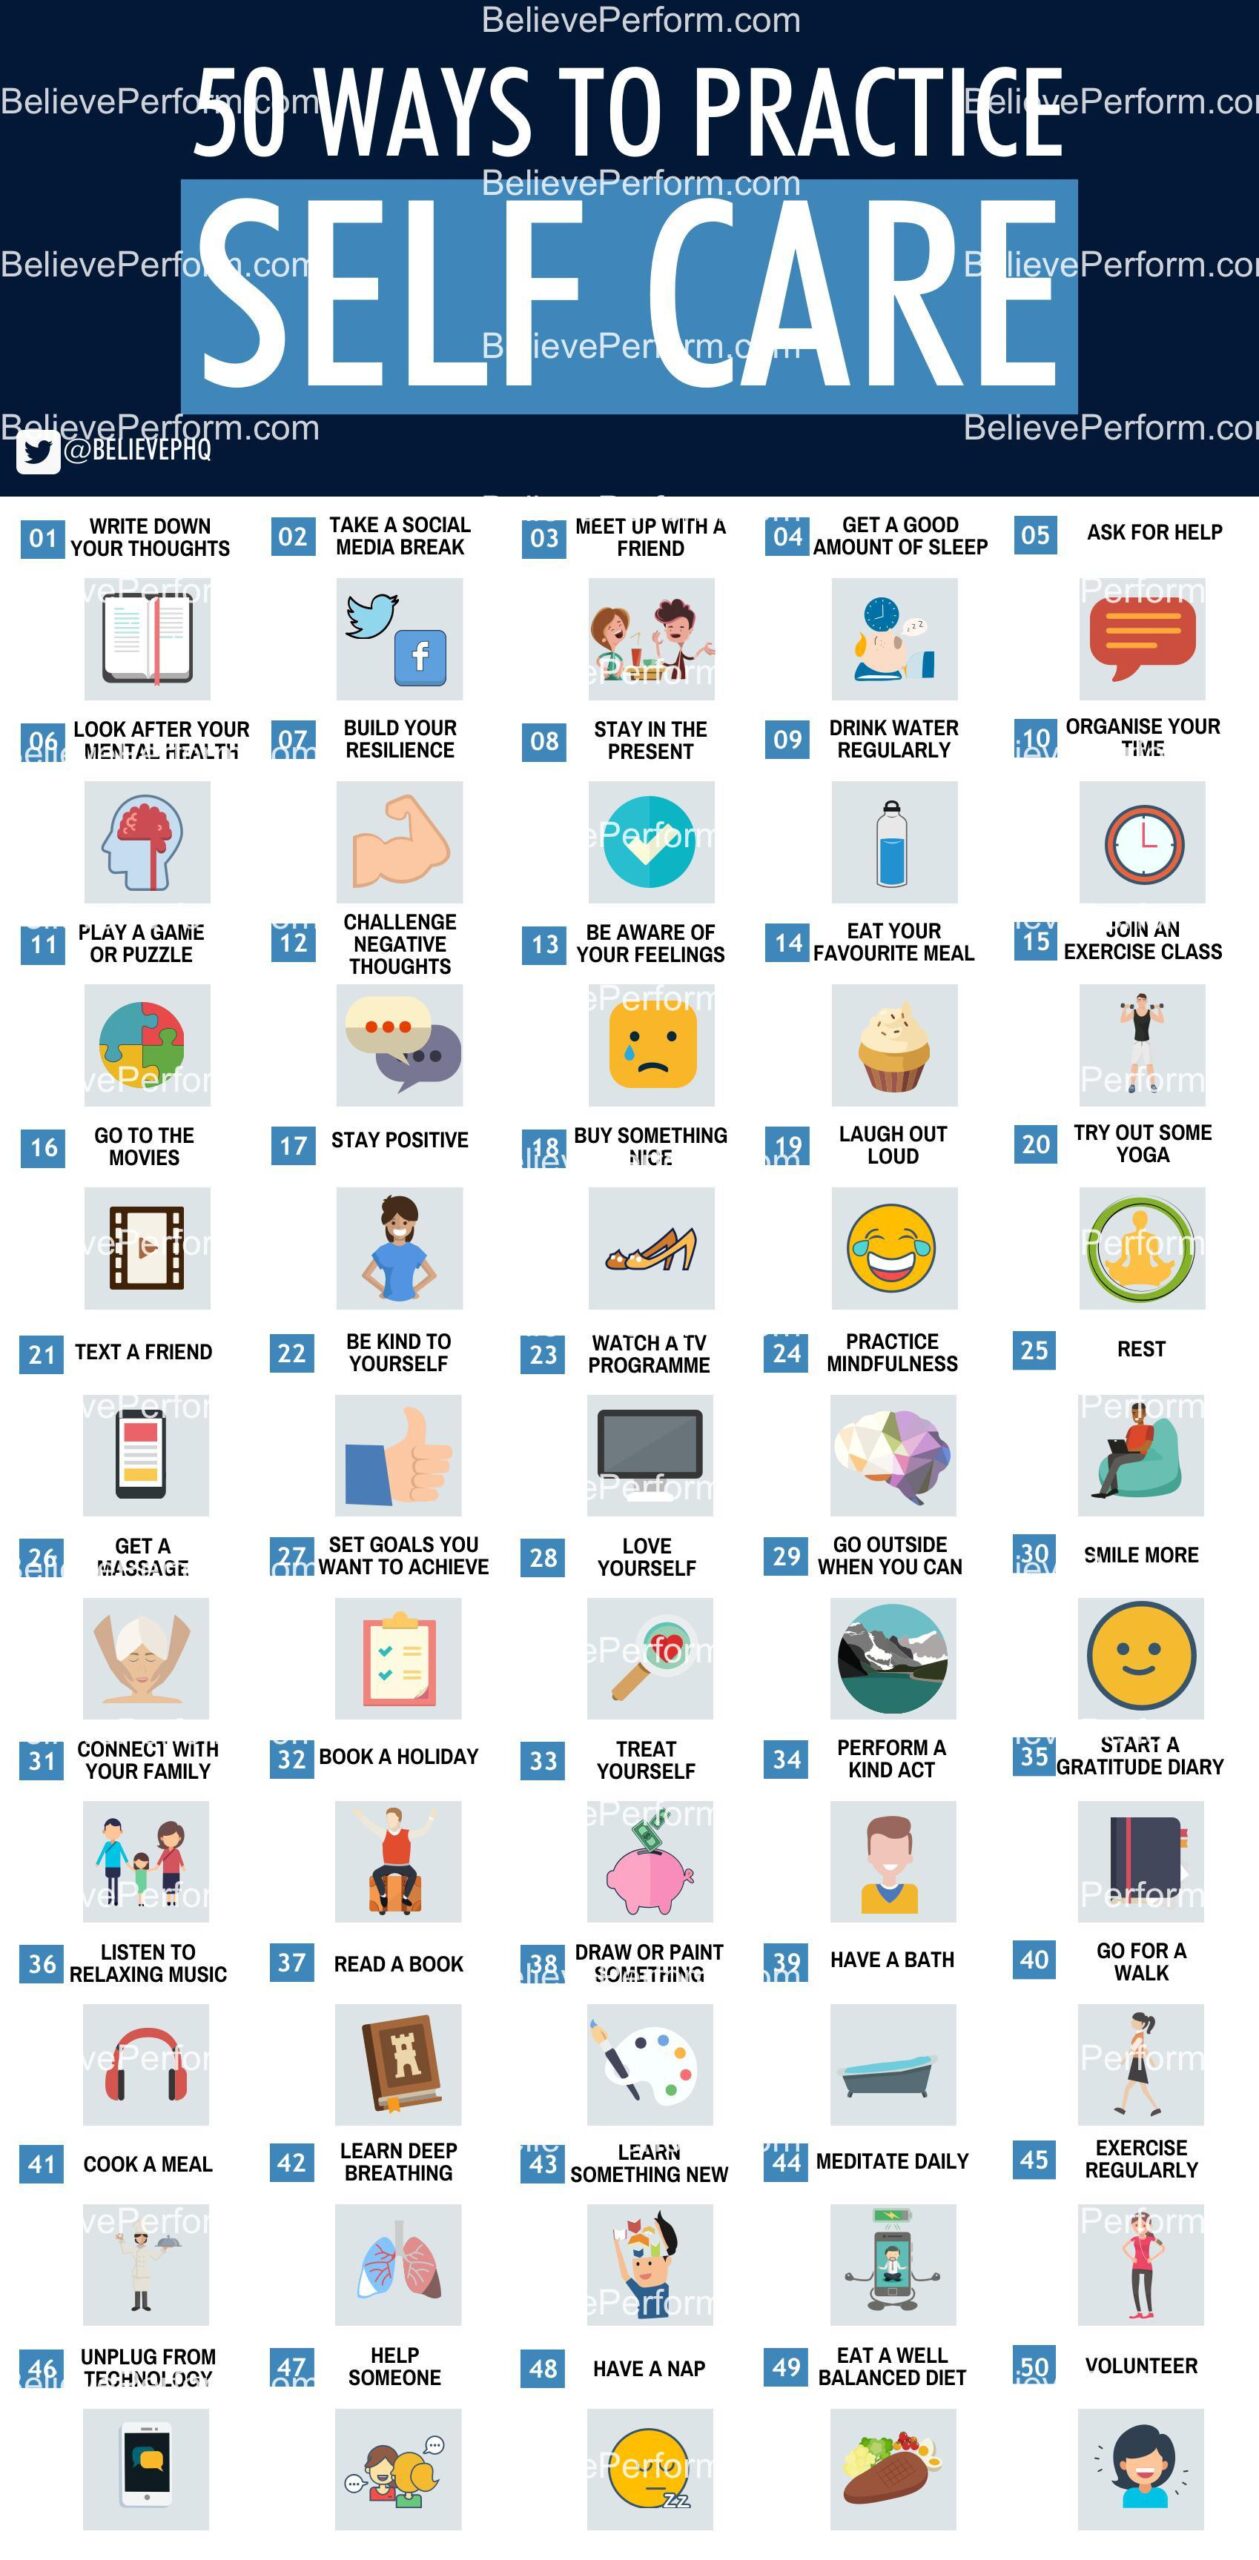 50-ways-to-practice-self-care-believeperform-the-uk-s-leading